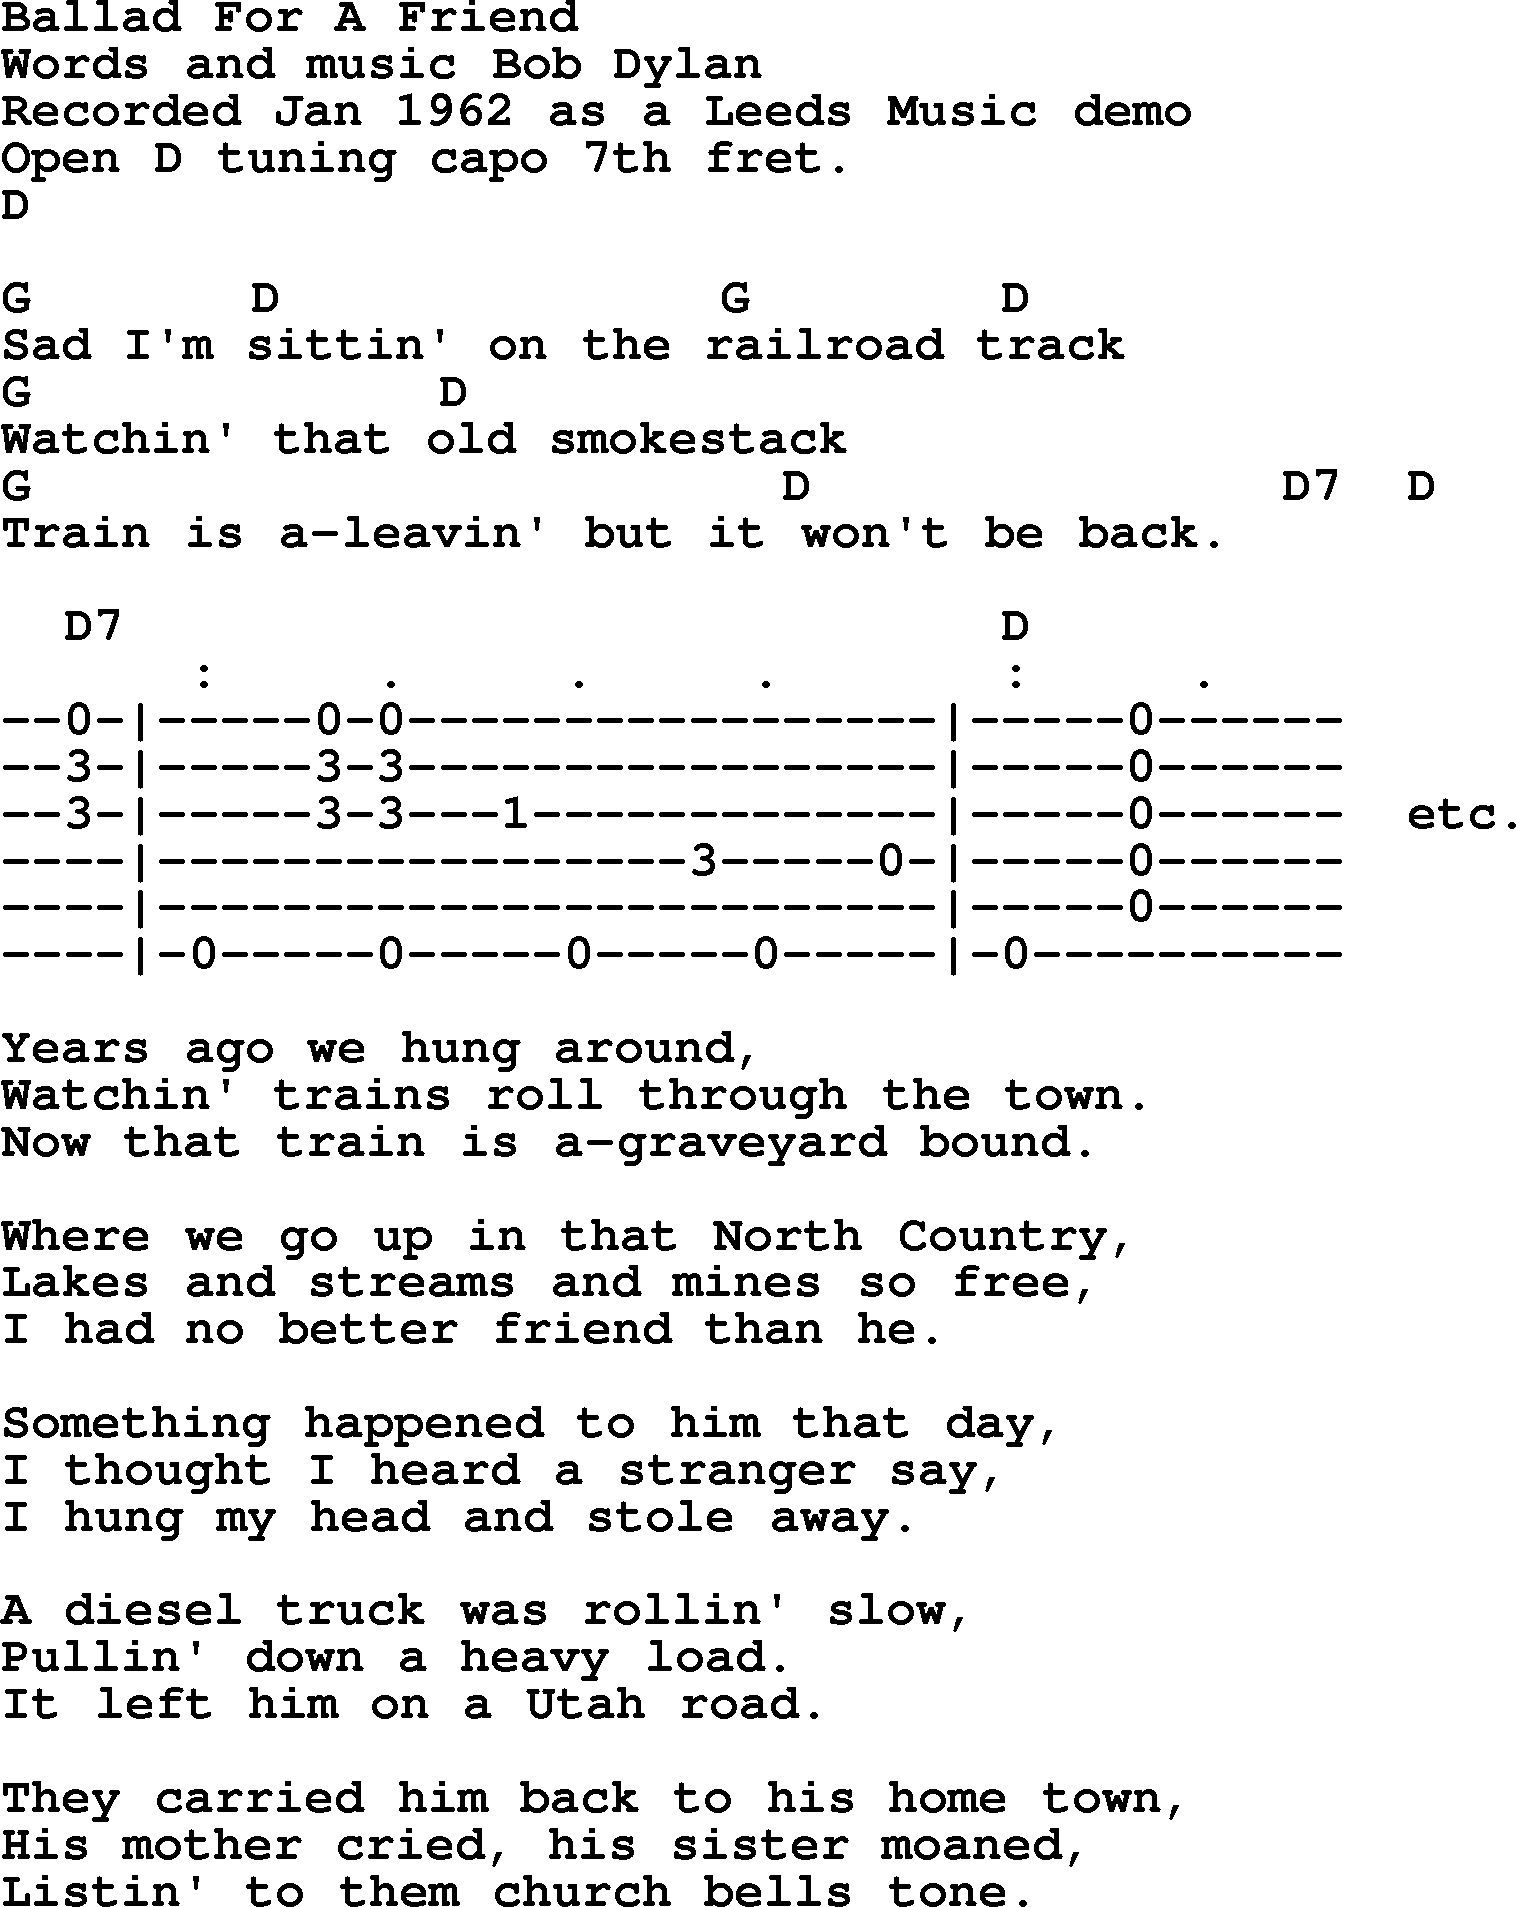 Bob Dylan song, lyrics with chords - Ballad For A Friend